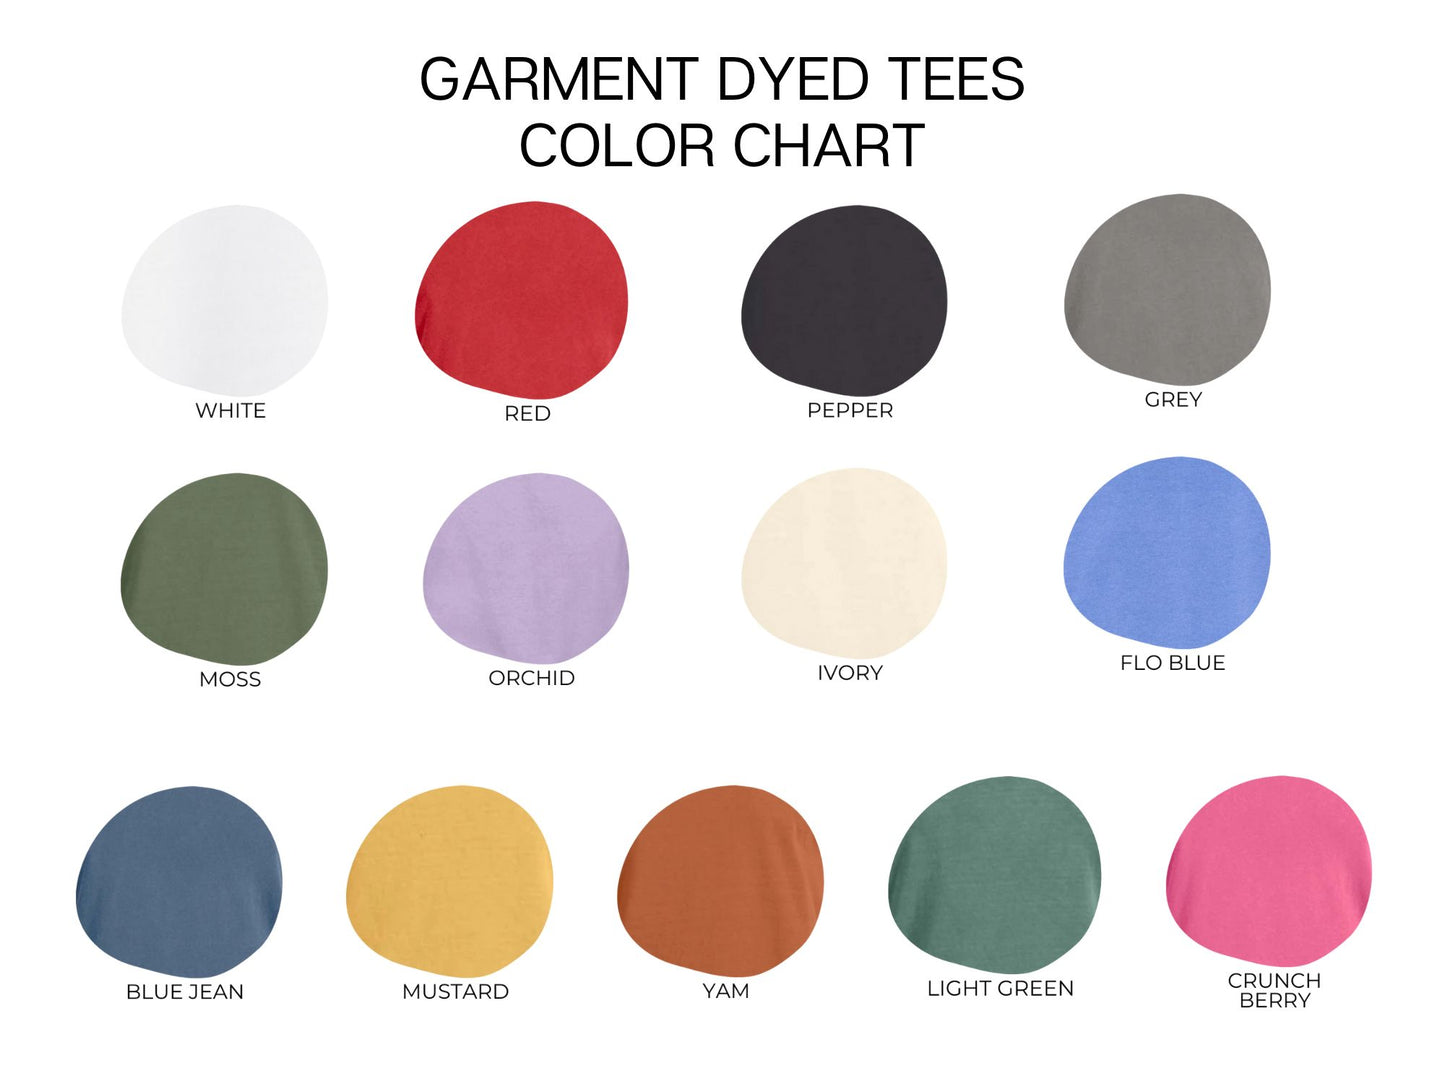 Answer To Someone's Prayer | Garment Dyed Teee